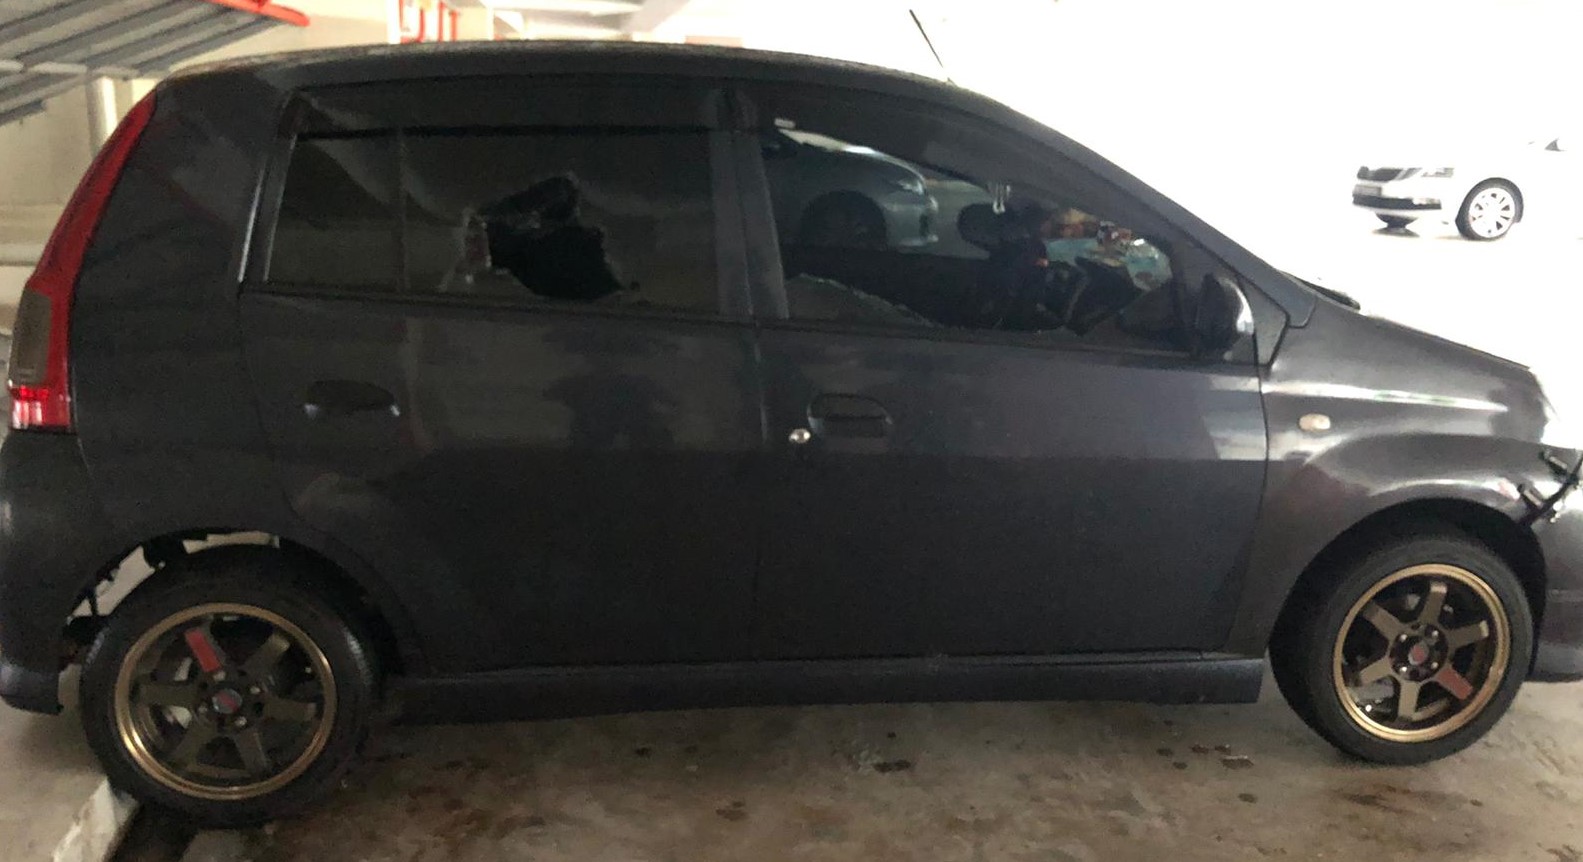 Car in which about 267g of ‘Ice’ was found within, in CNB operation on 11 February 2020.